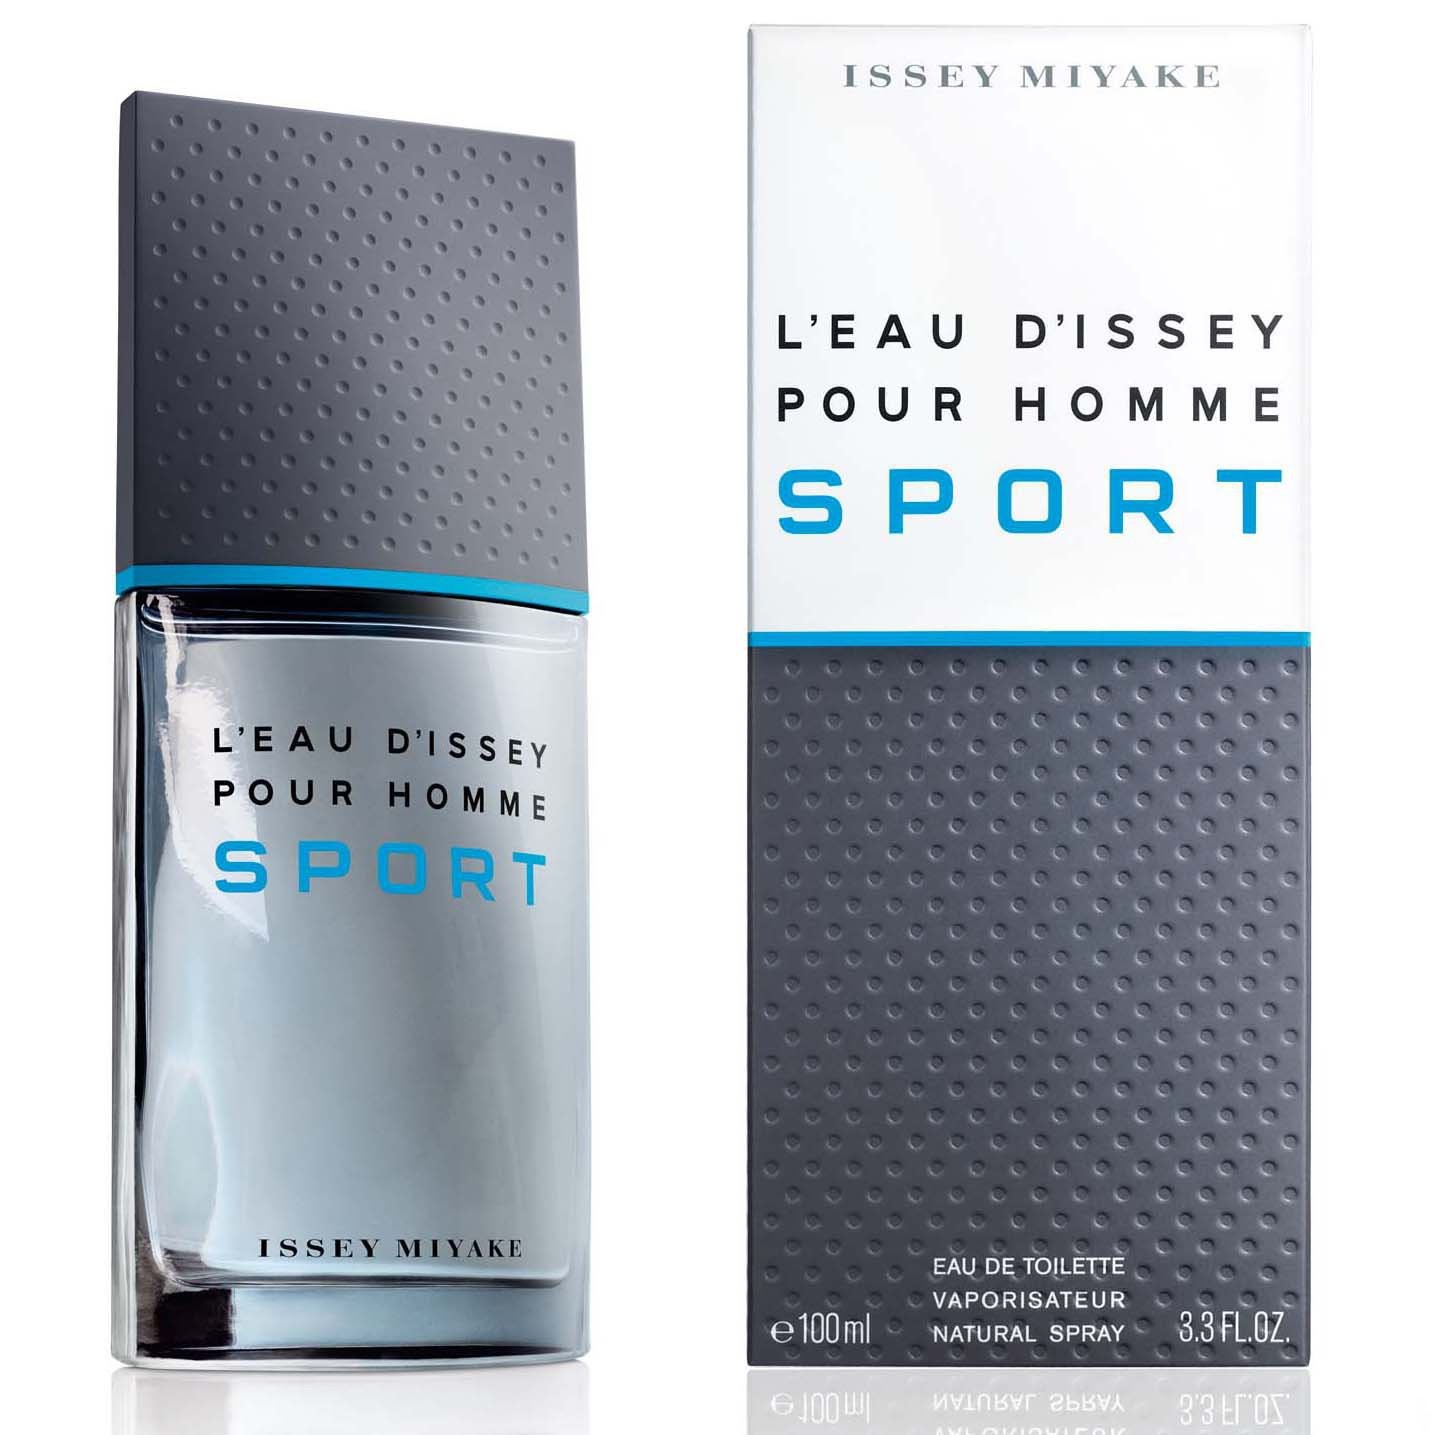 ISSEY MIYAKE L'EAU D'ISSEY SPORT POUR HOMME